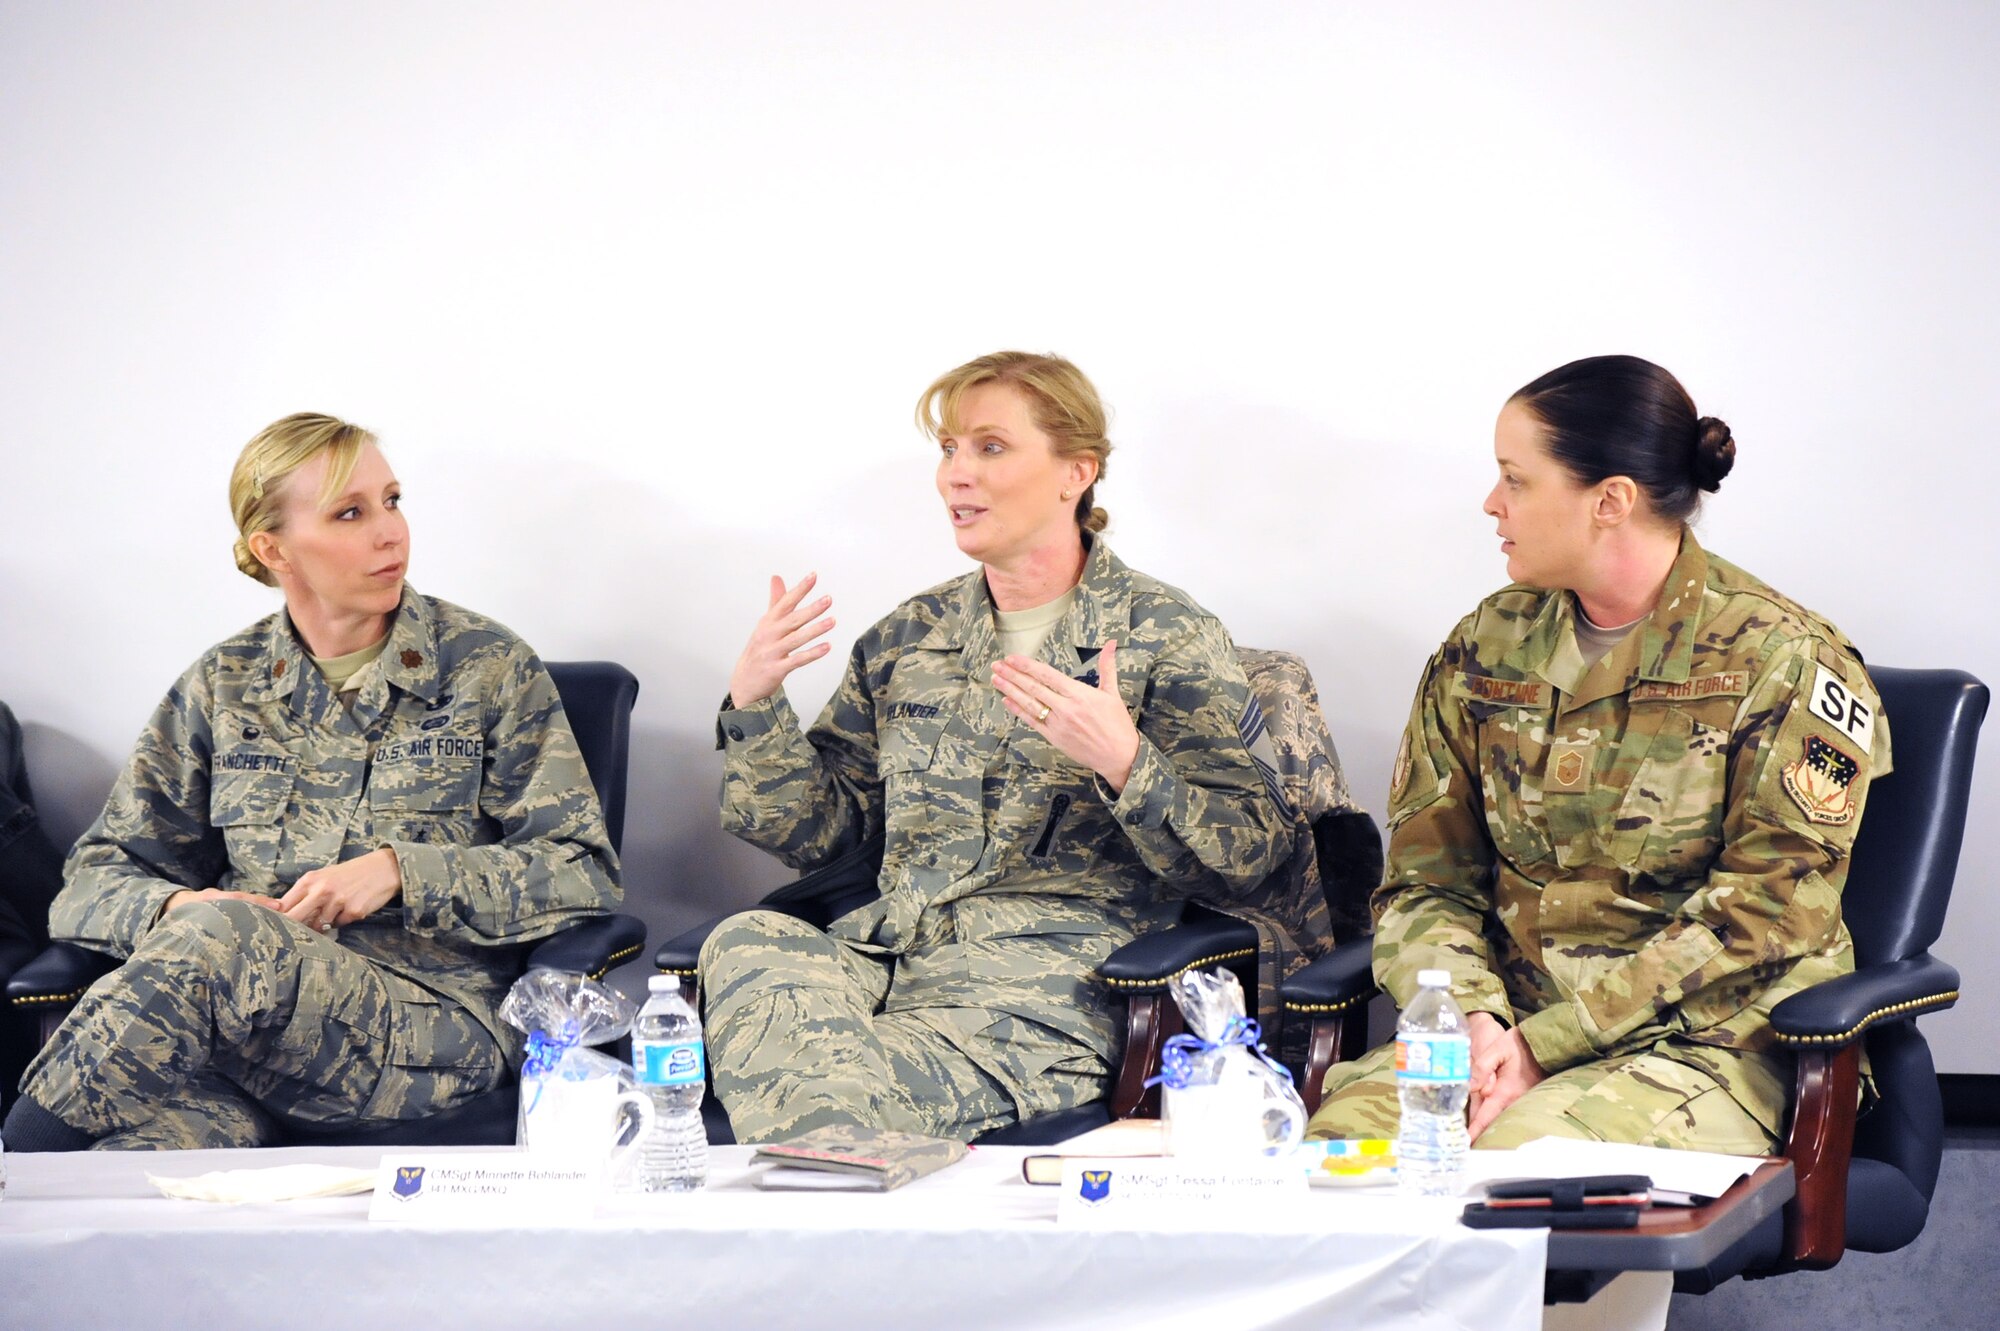 Chief Master Sgt. Minnette Bohlander, 341st Maintenance Group superintendent, center, discusses challenges she faced throughout her career at the first “Let’s Connect” event Nov. 16, 2017, at Malmstrom Air Force Base, Mont. The event’s theme, Lead like a Girl, focused on specific discussion topics including improving workplace relations, controlling emotions and communication up and down the chain of command. (U.S. Air Force photo by Christy Mason)